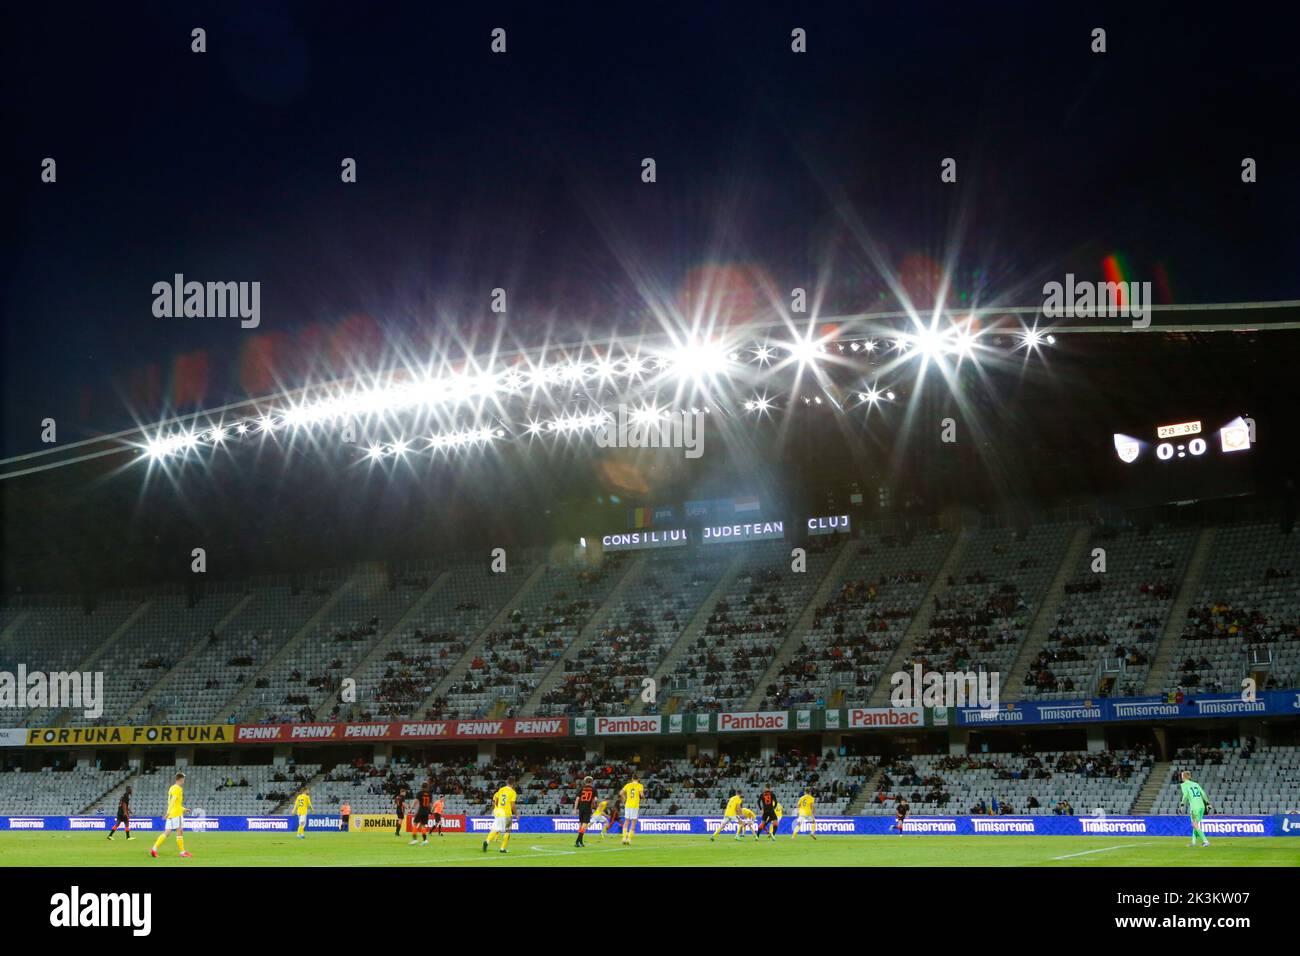 CLUC, ROMANIA - SEPTEMBER 27: A general interior overview during the International Friendly match between Romania U23 and Netherlands U23 at Cluj Arena on September 27, 2022 in Cluc, Romania (Photo by Nikola Krstic/BSR Agency) Stock Photo